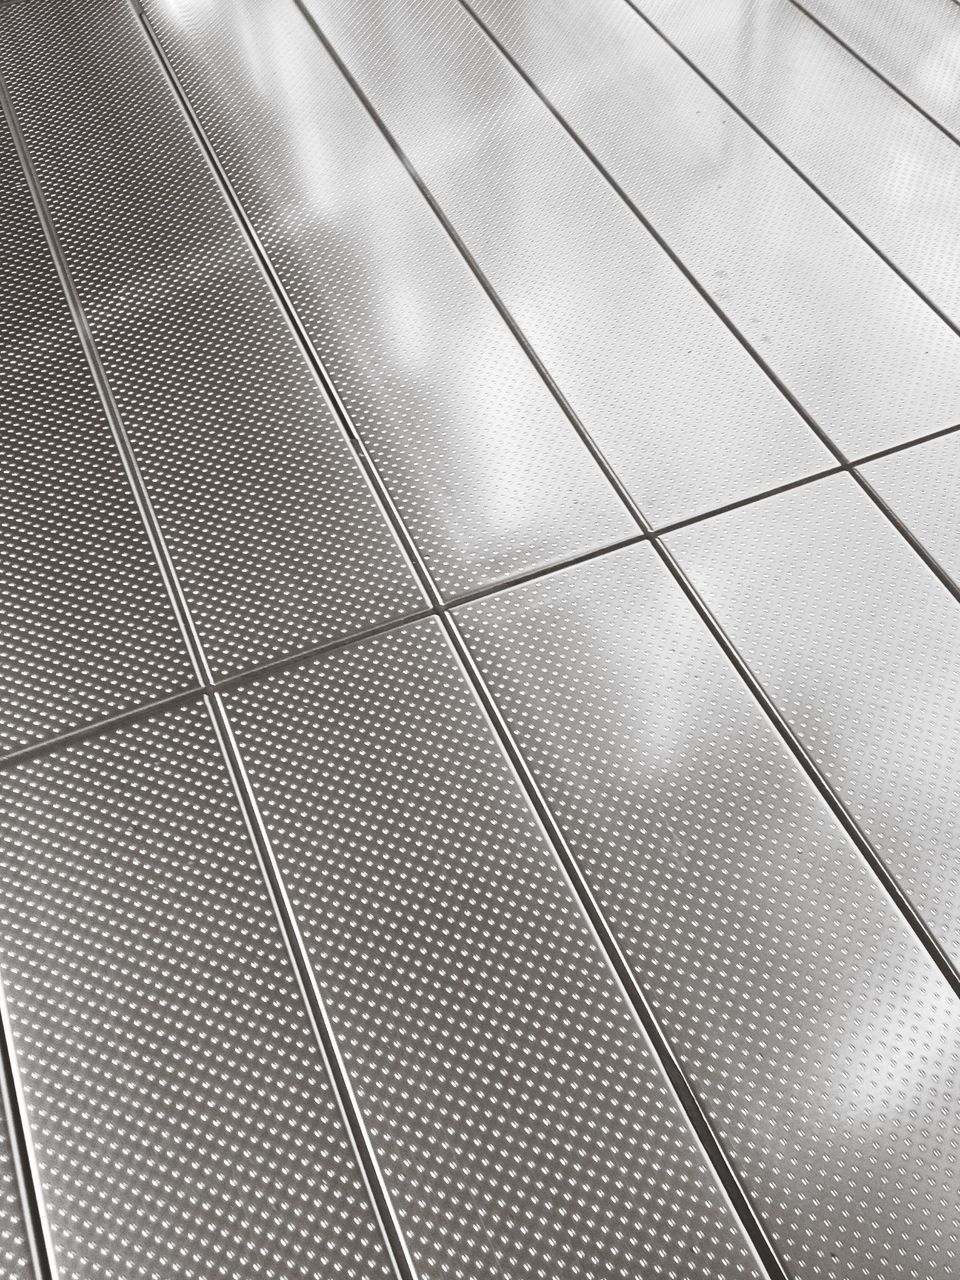 full frame, pattern, indoors, backgrounds, high angle view, design, metal, ceiling, textured, modern, repetition, close-up, no people, metallic, geometric shape, abstract, day, low angle view, detail, tile